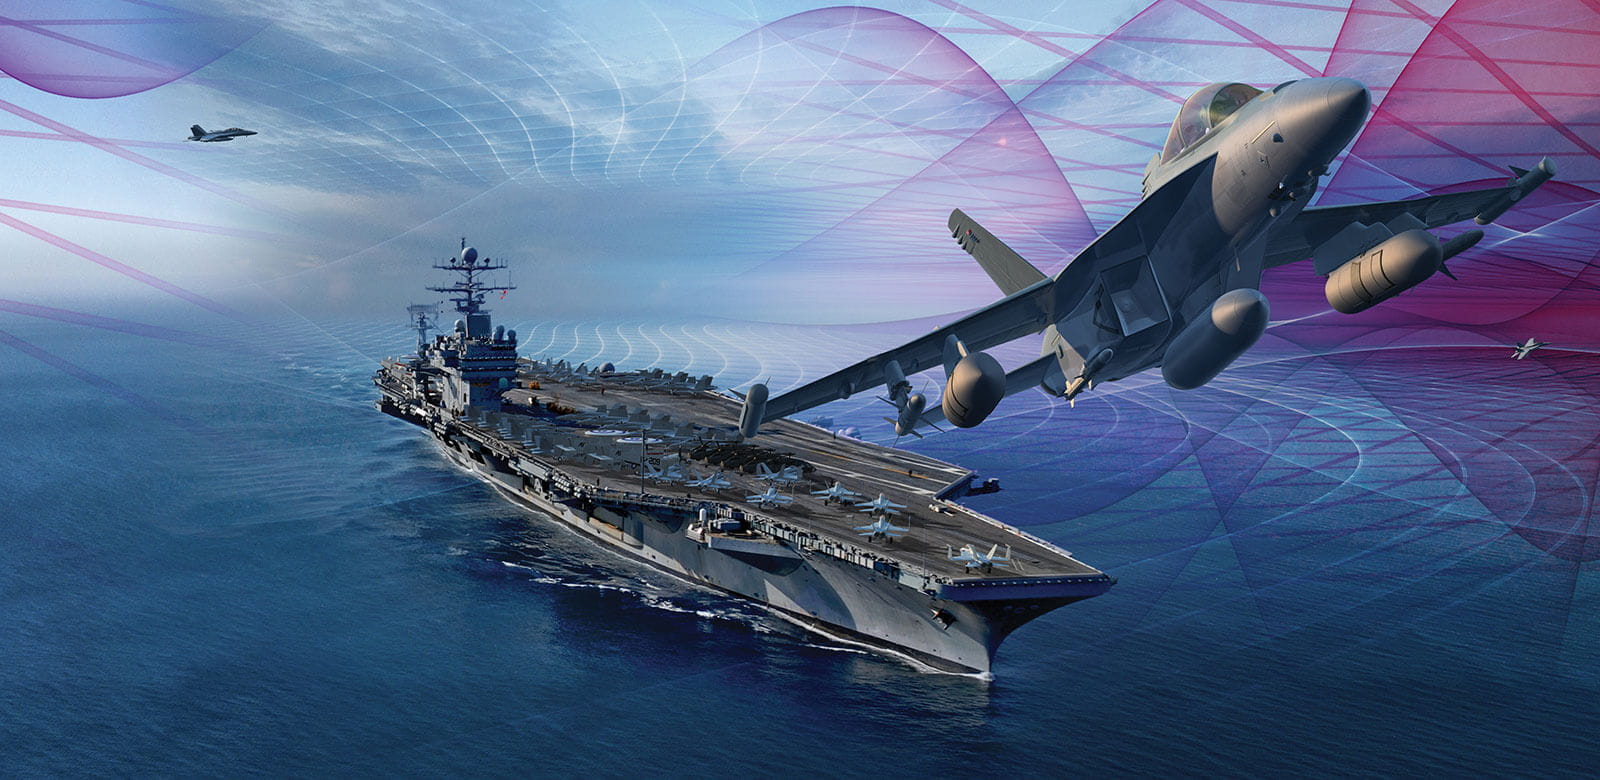 An artist rendition of a plane taking off from a ship, showing radar coverage.